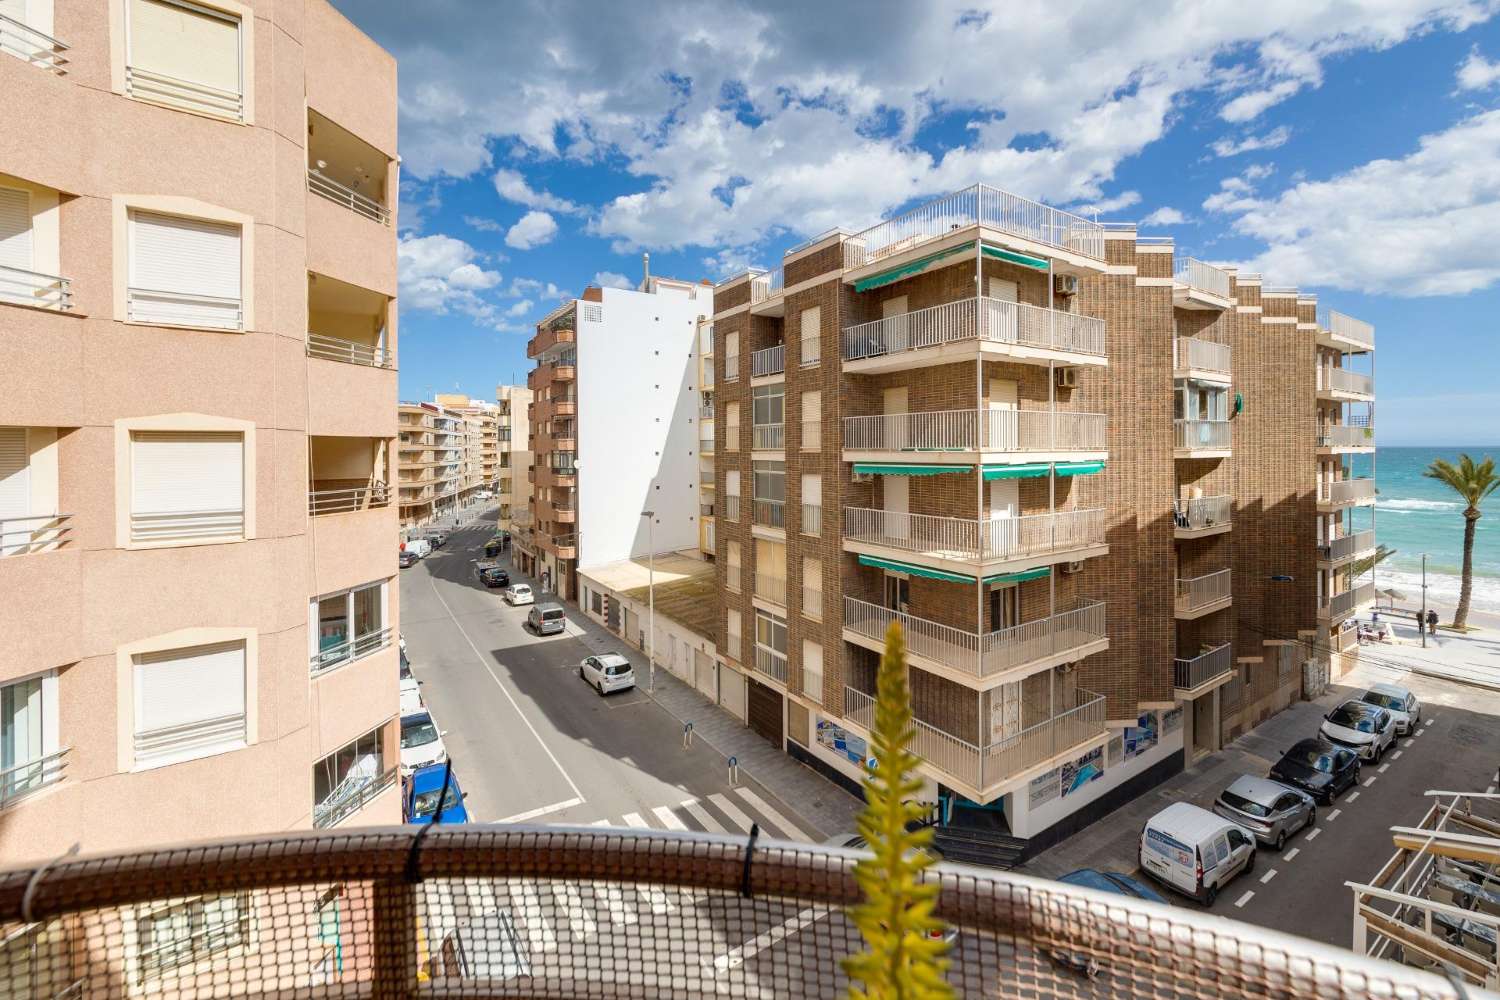 Apartment 3 bedrooms 2 bathrooms front sea views on the second line of Cura beach with garage